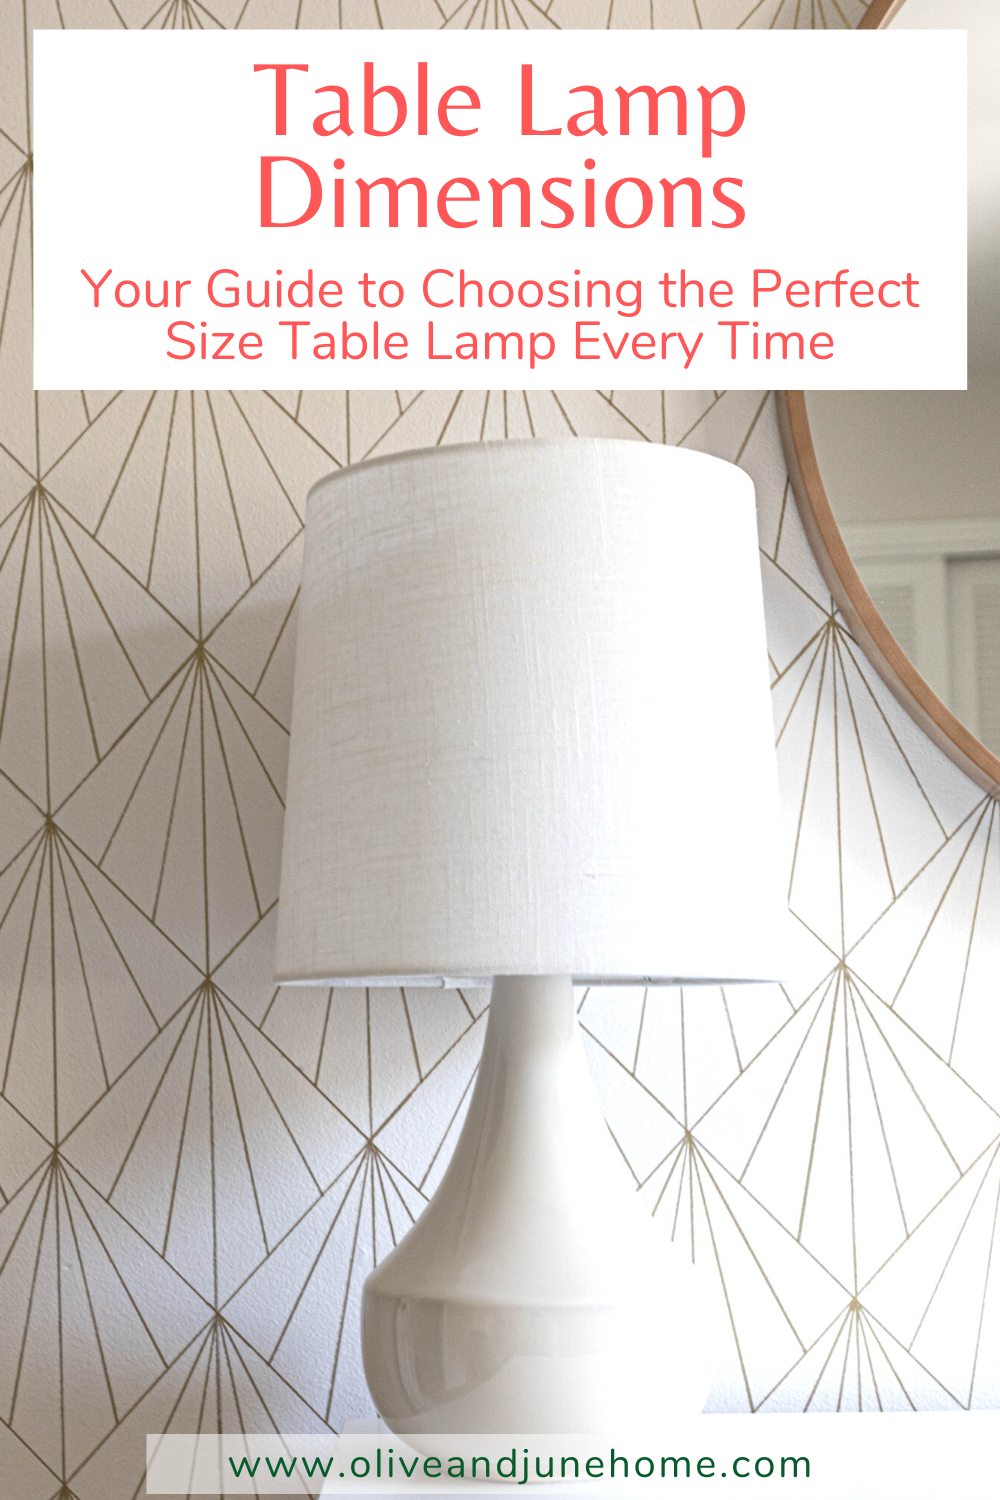 How To Pick The Right Size Lamp Every, How To You Measure A Table Lamp Height